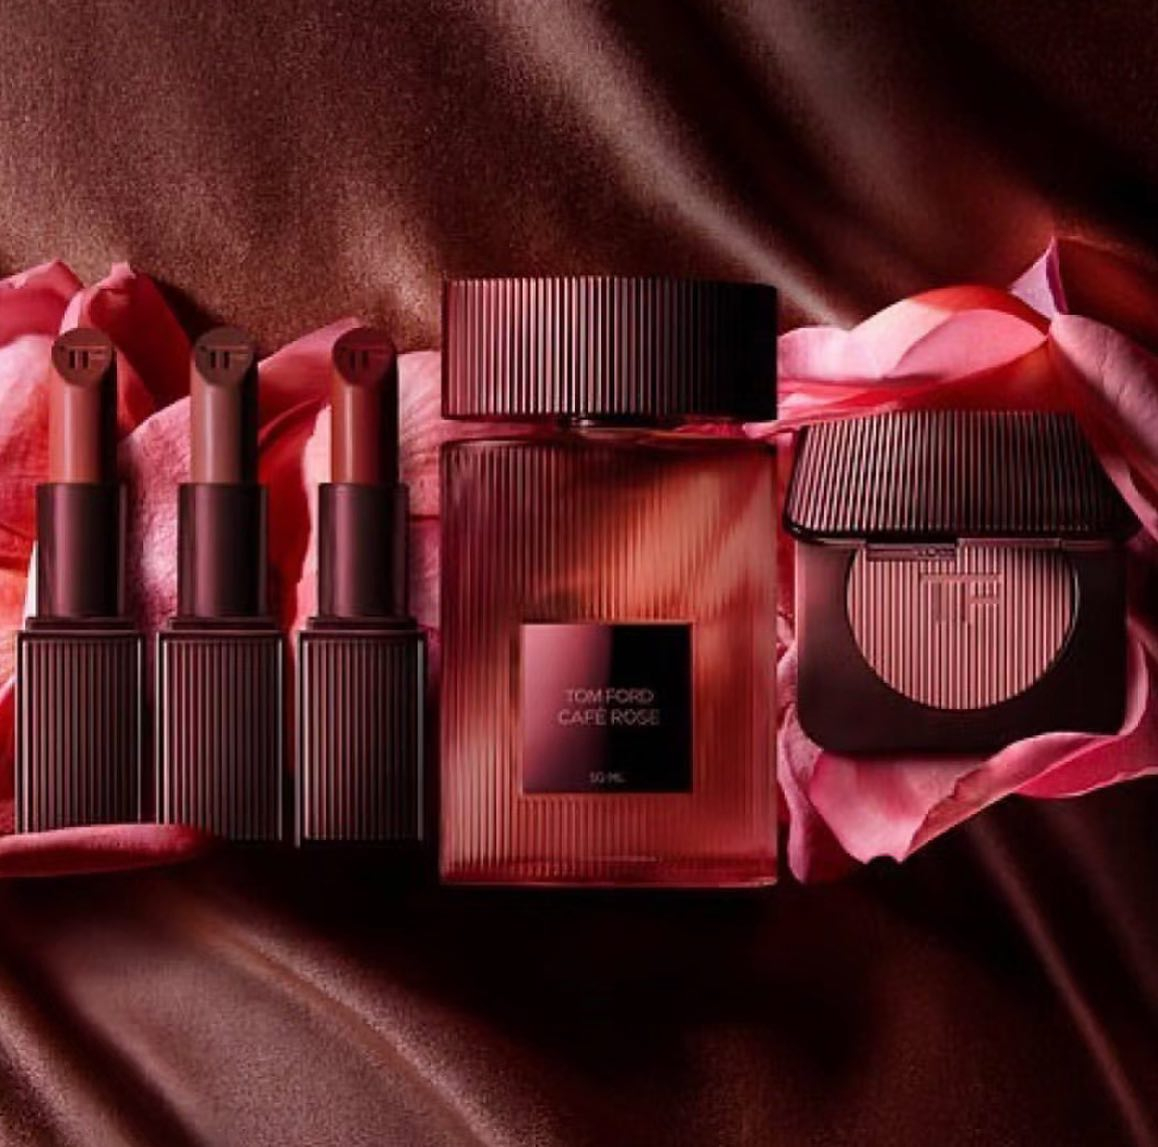 Tom Ford Cafe Rose Collection